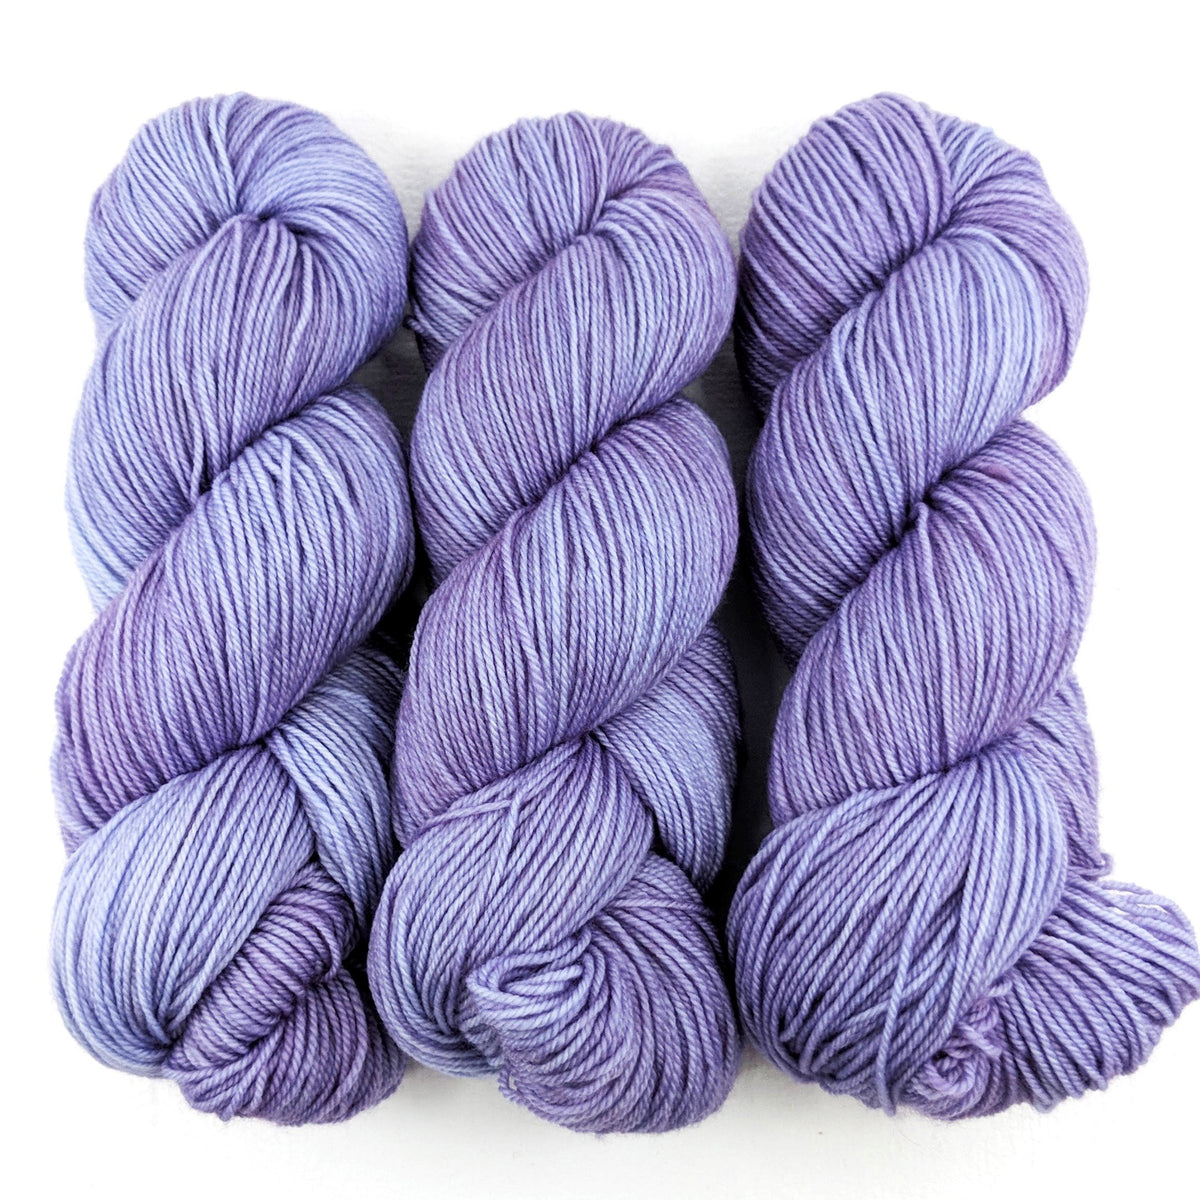 English Lavender - Passion 8 Fingering - Dyed Stock